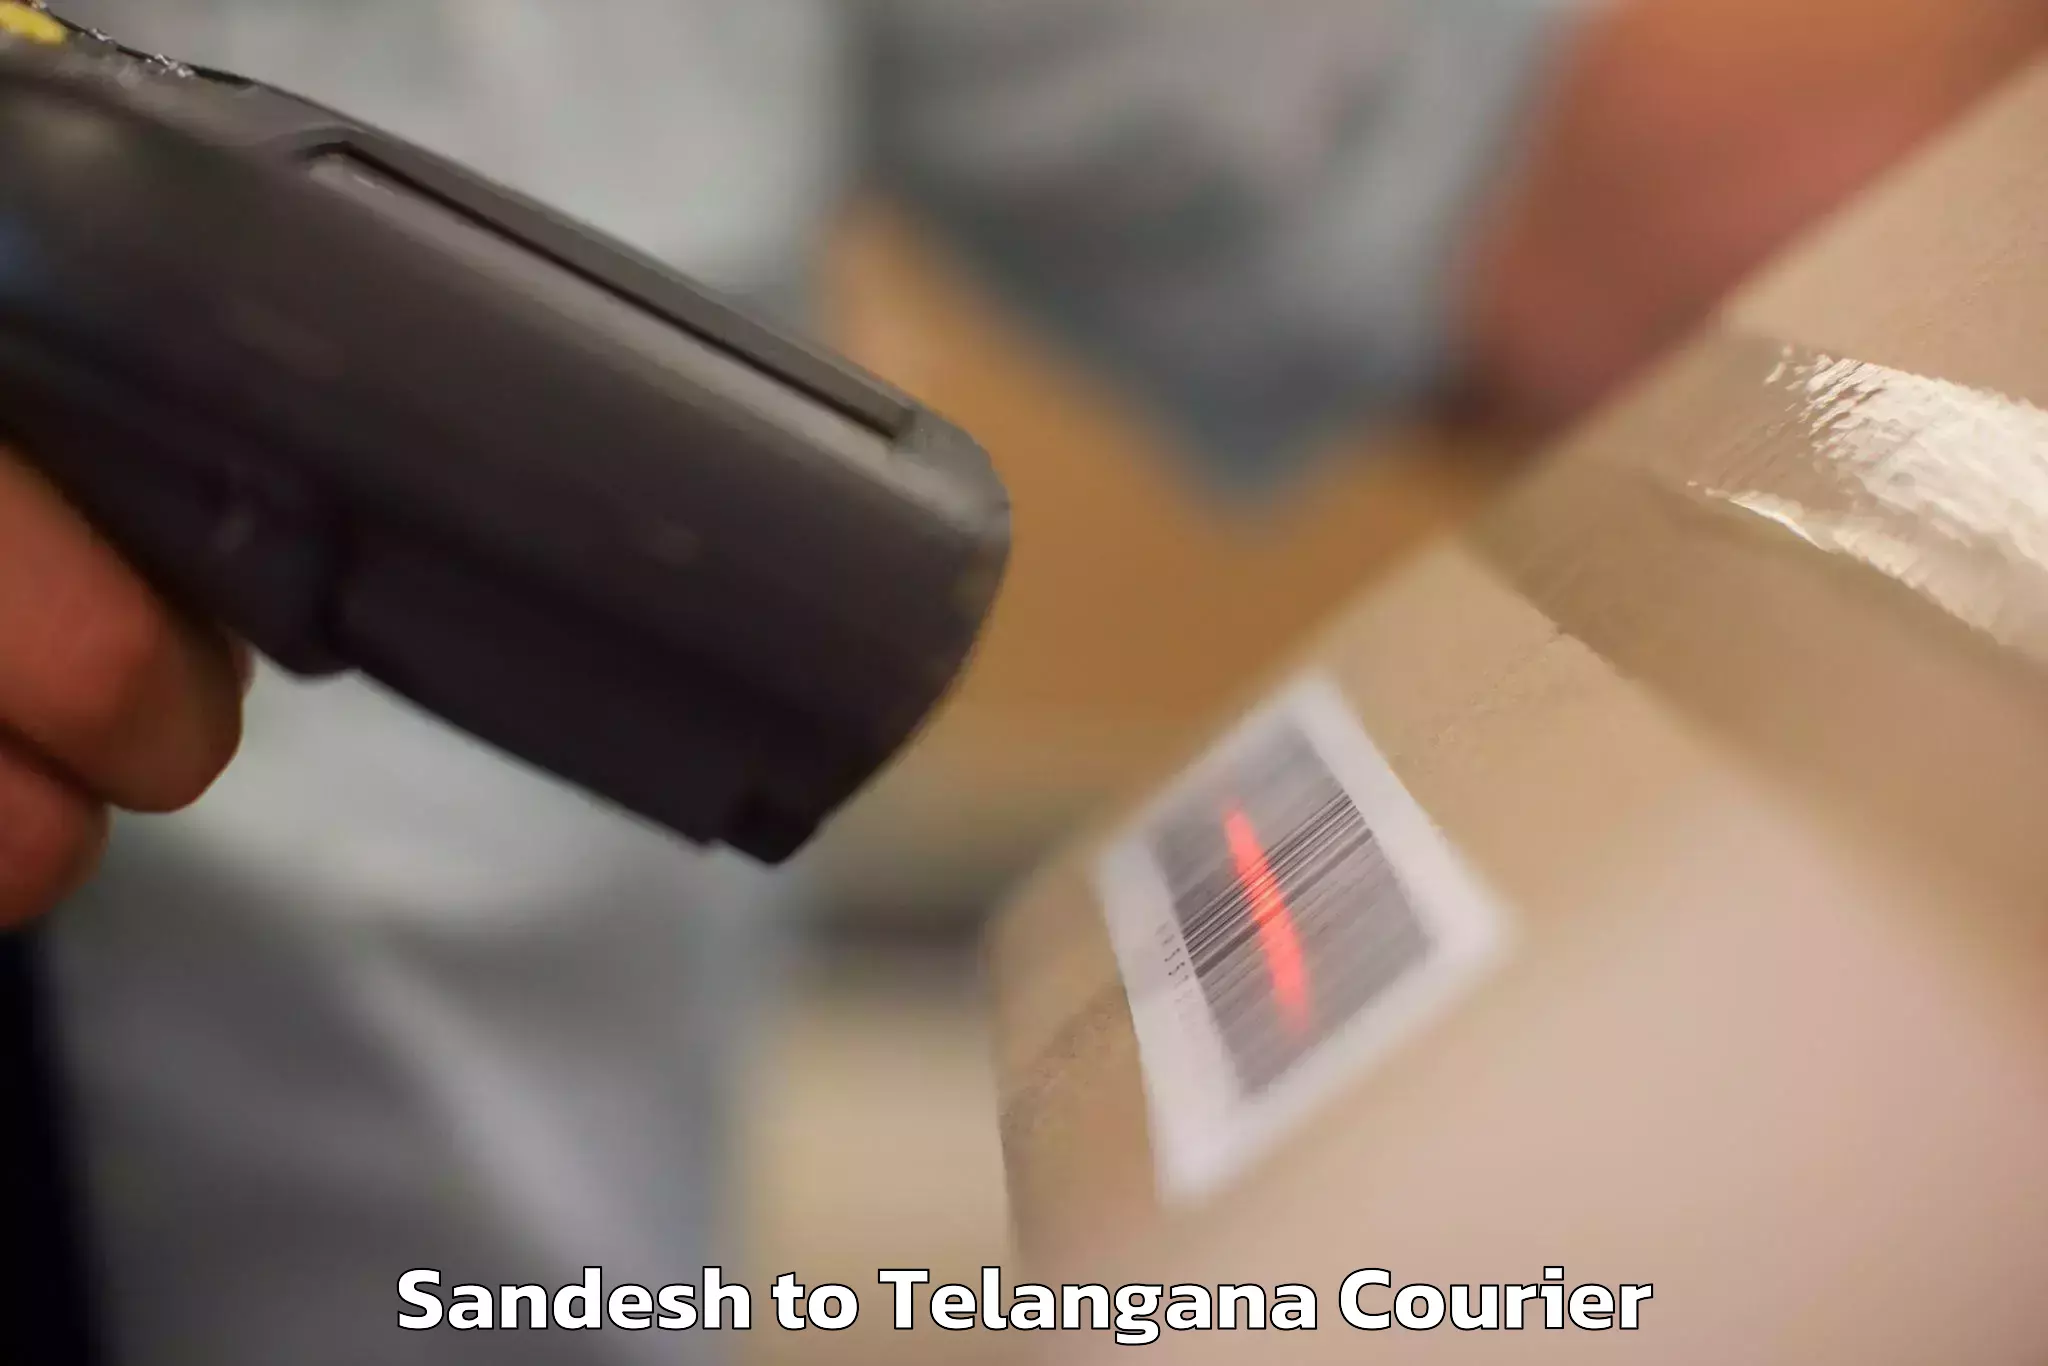 Personal effects shipping in Sandesh to Vikarabad